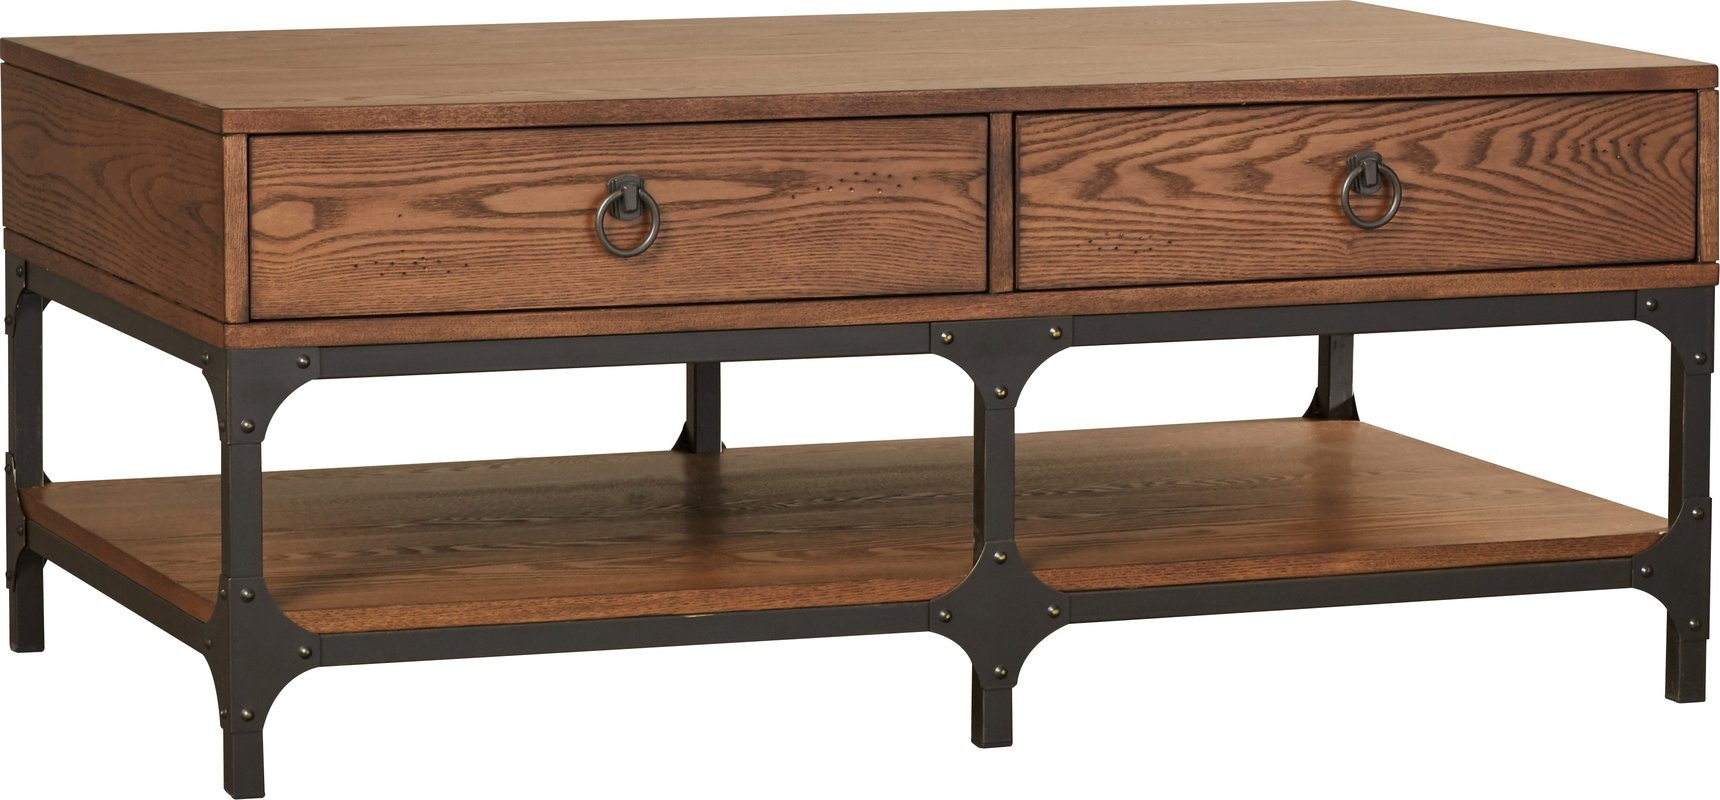 Tanner Coffee Table - Image 5